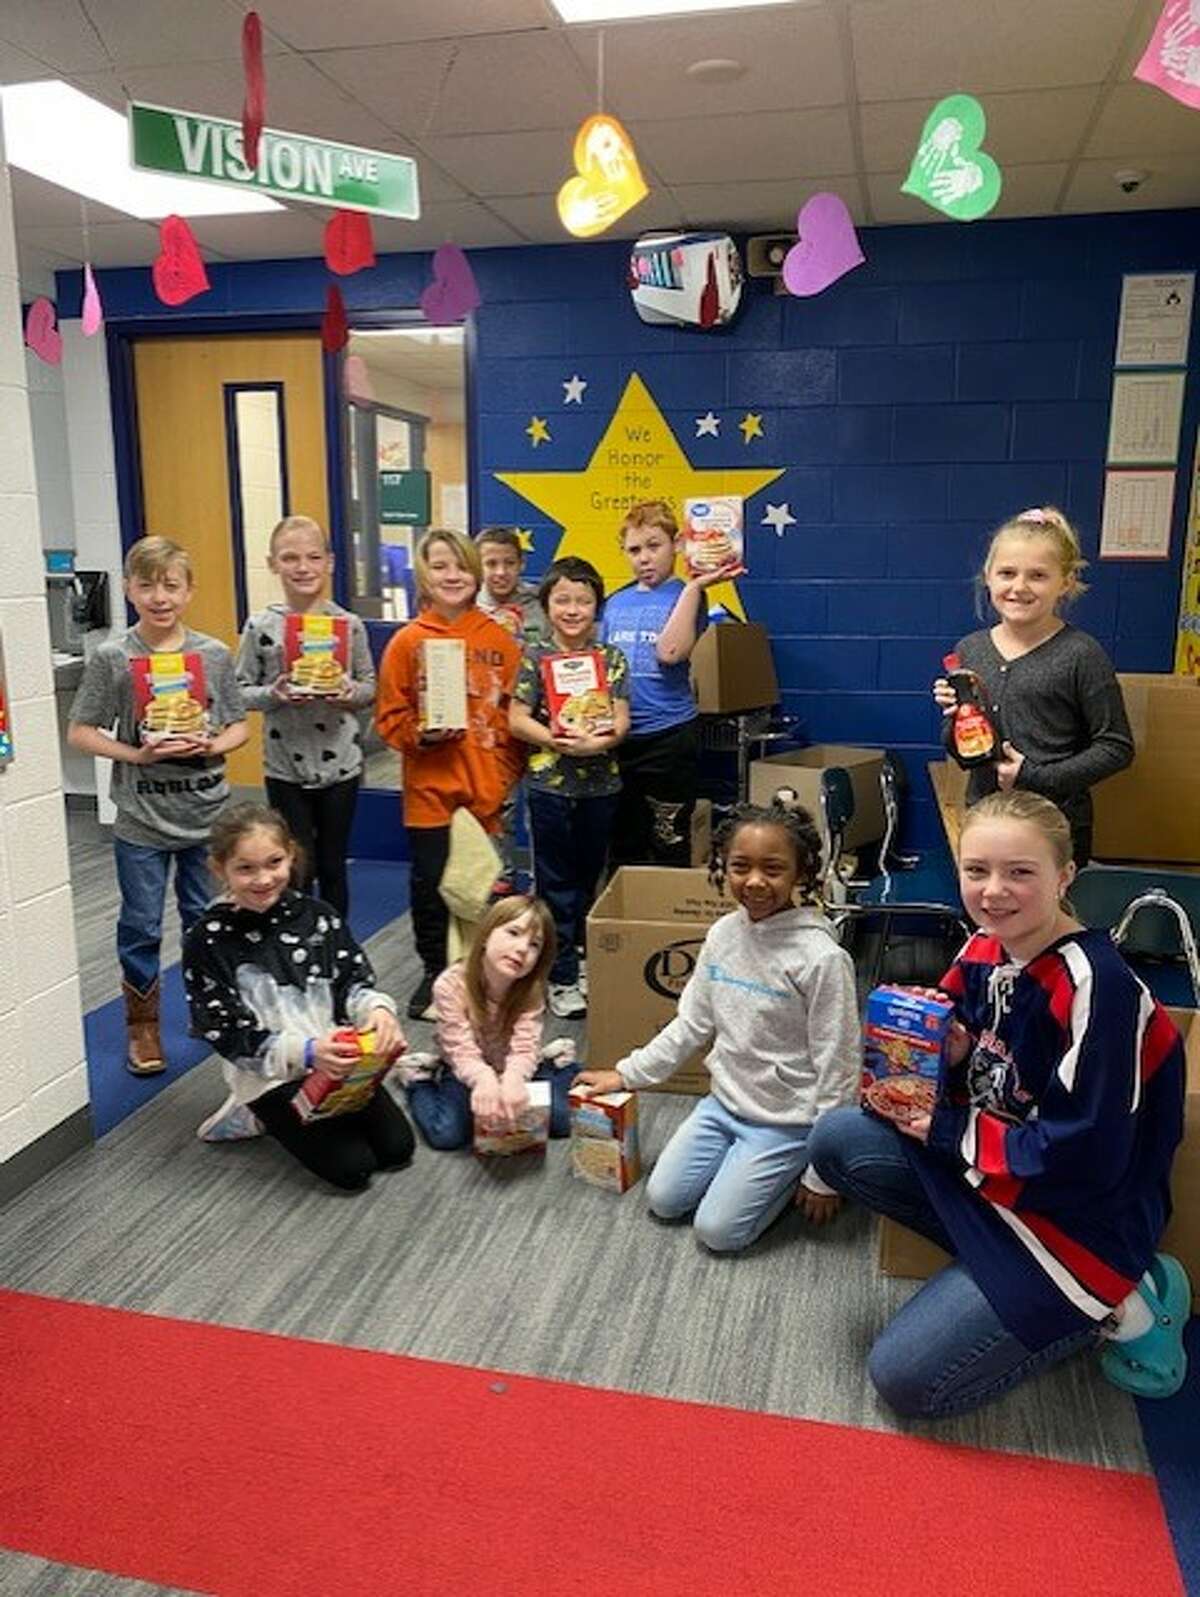 Students at Brookside Elementary School in Big Rapids collected pancake mix, syrup and oatmeal for Manna Pantry as part of the annual February Kindness Service Project.